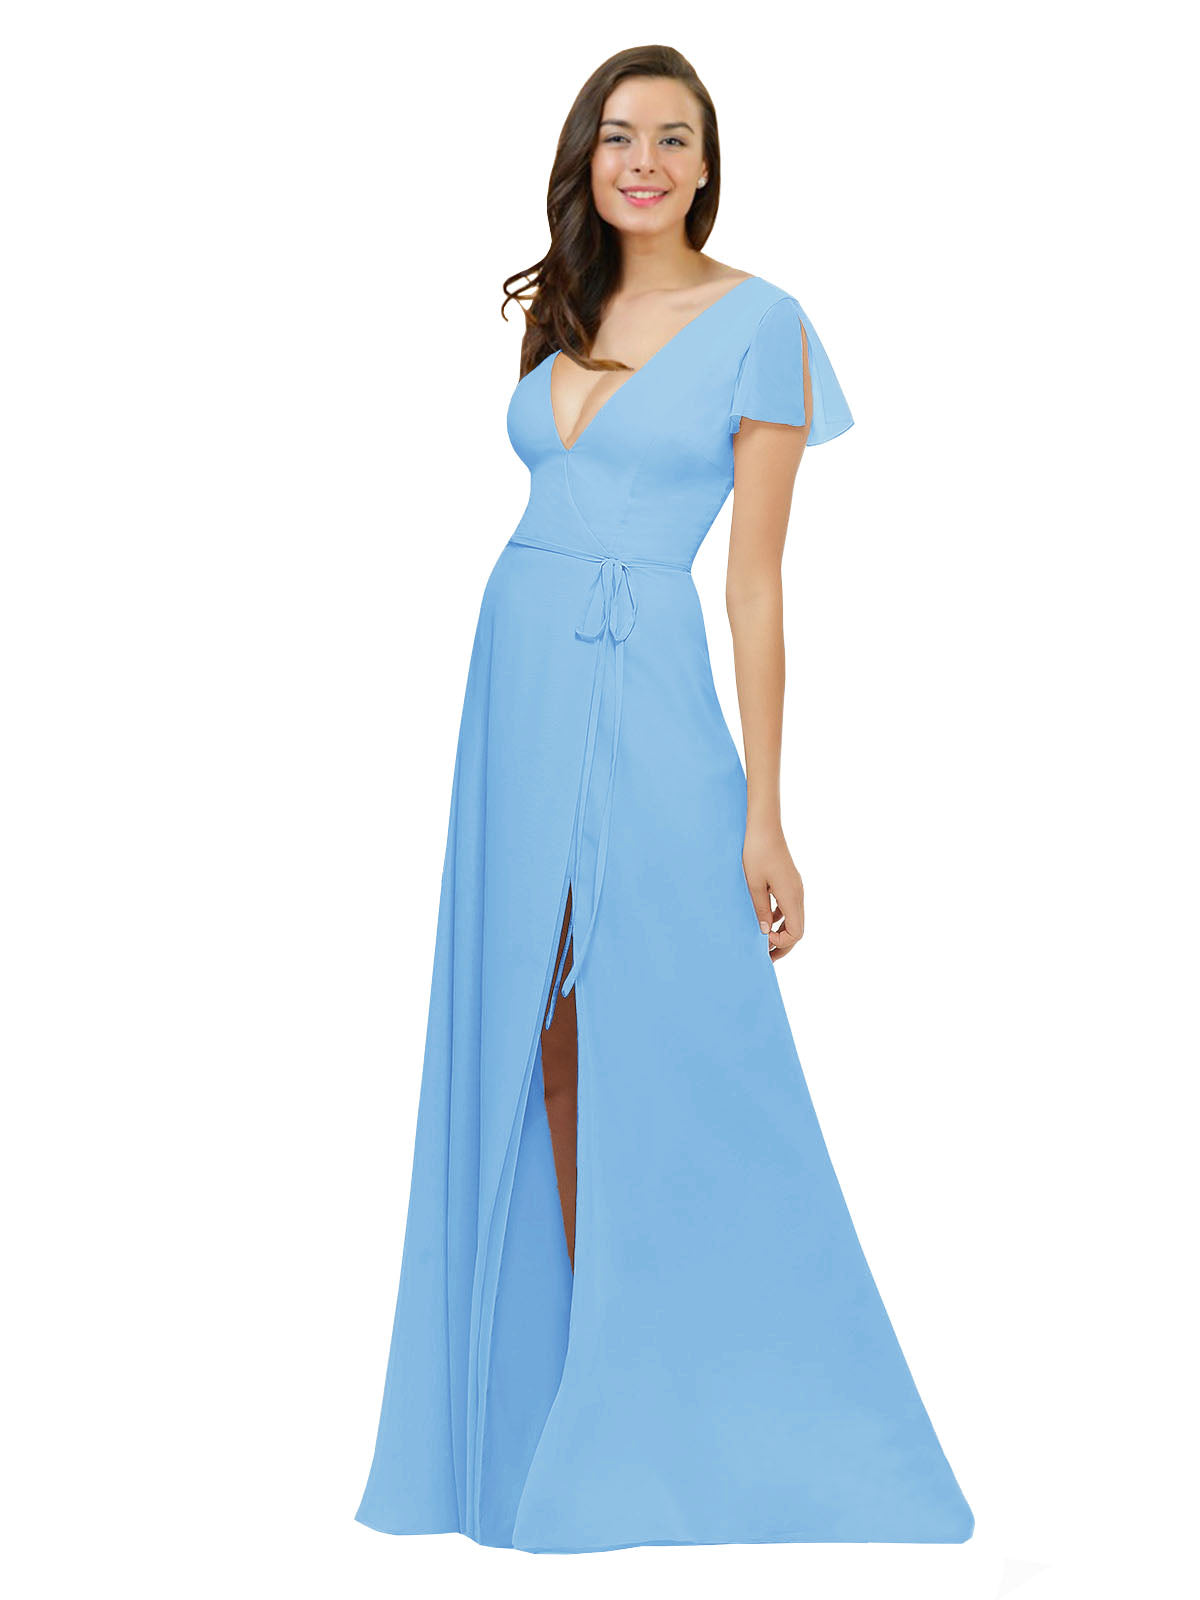 Periwinkle A-Line V-Neck Cap Sleeves Long Bridesmaid Dress Dayna